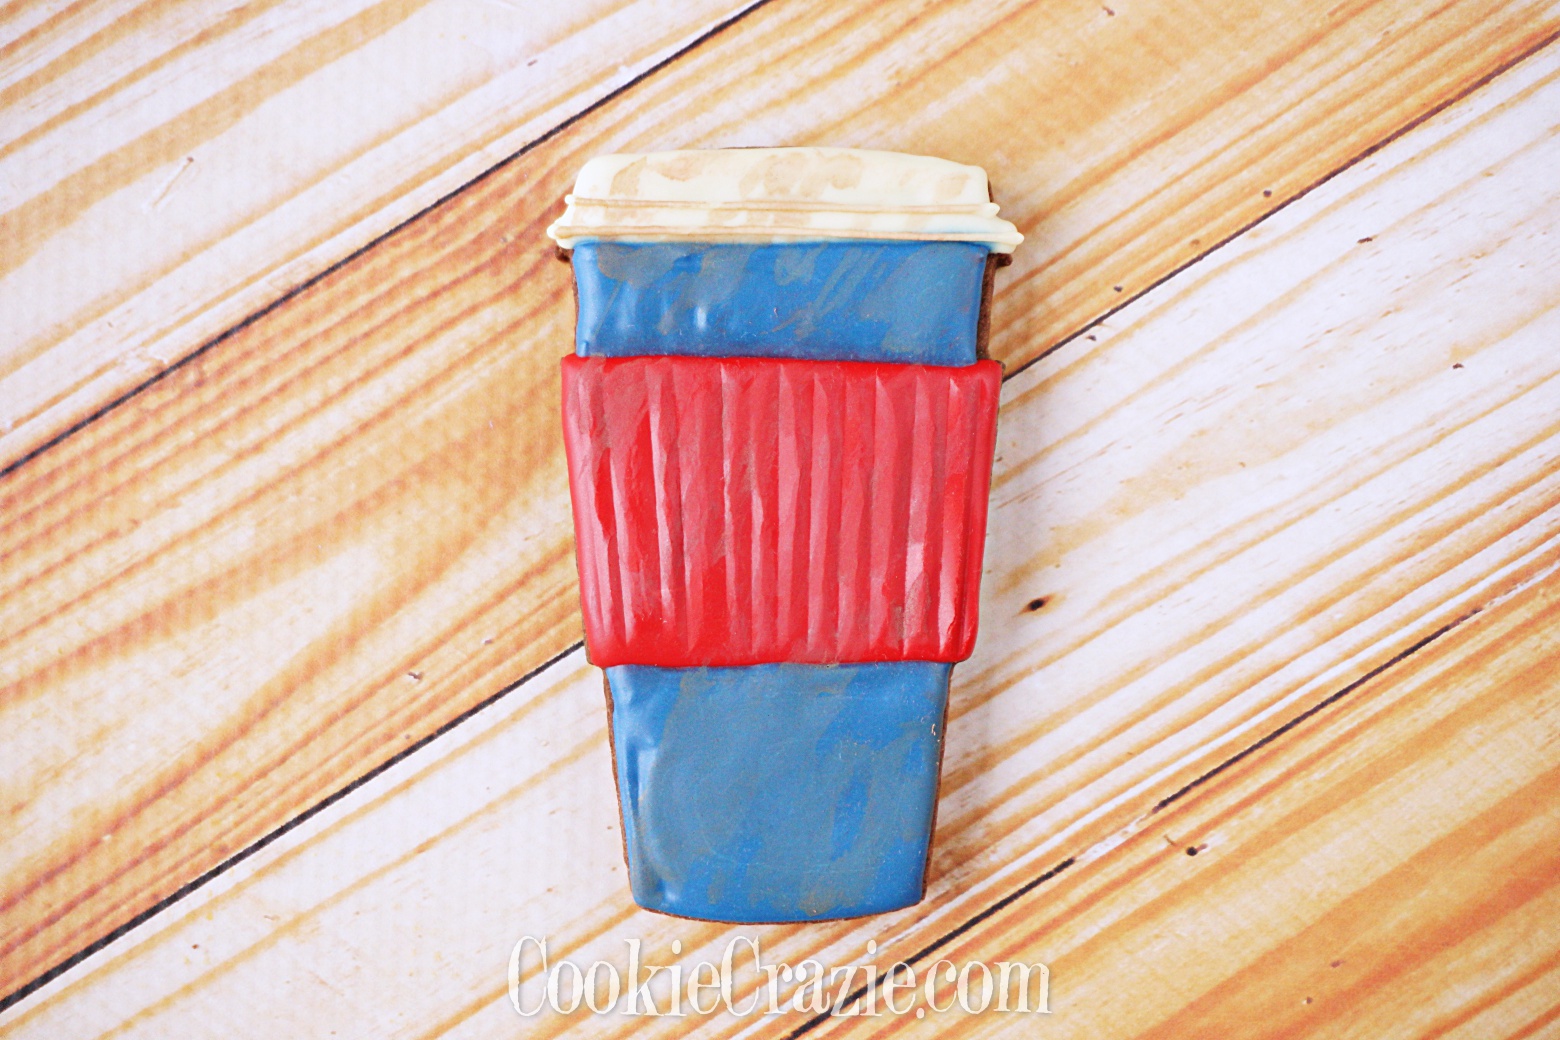  USA Patriotic To-Go Coffee Cup Decorated Sugar Cookie YouTube video  HERE  